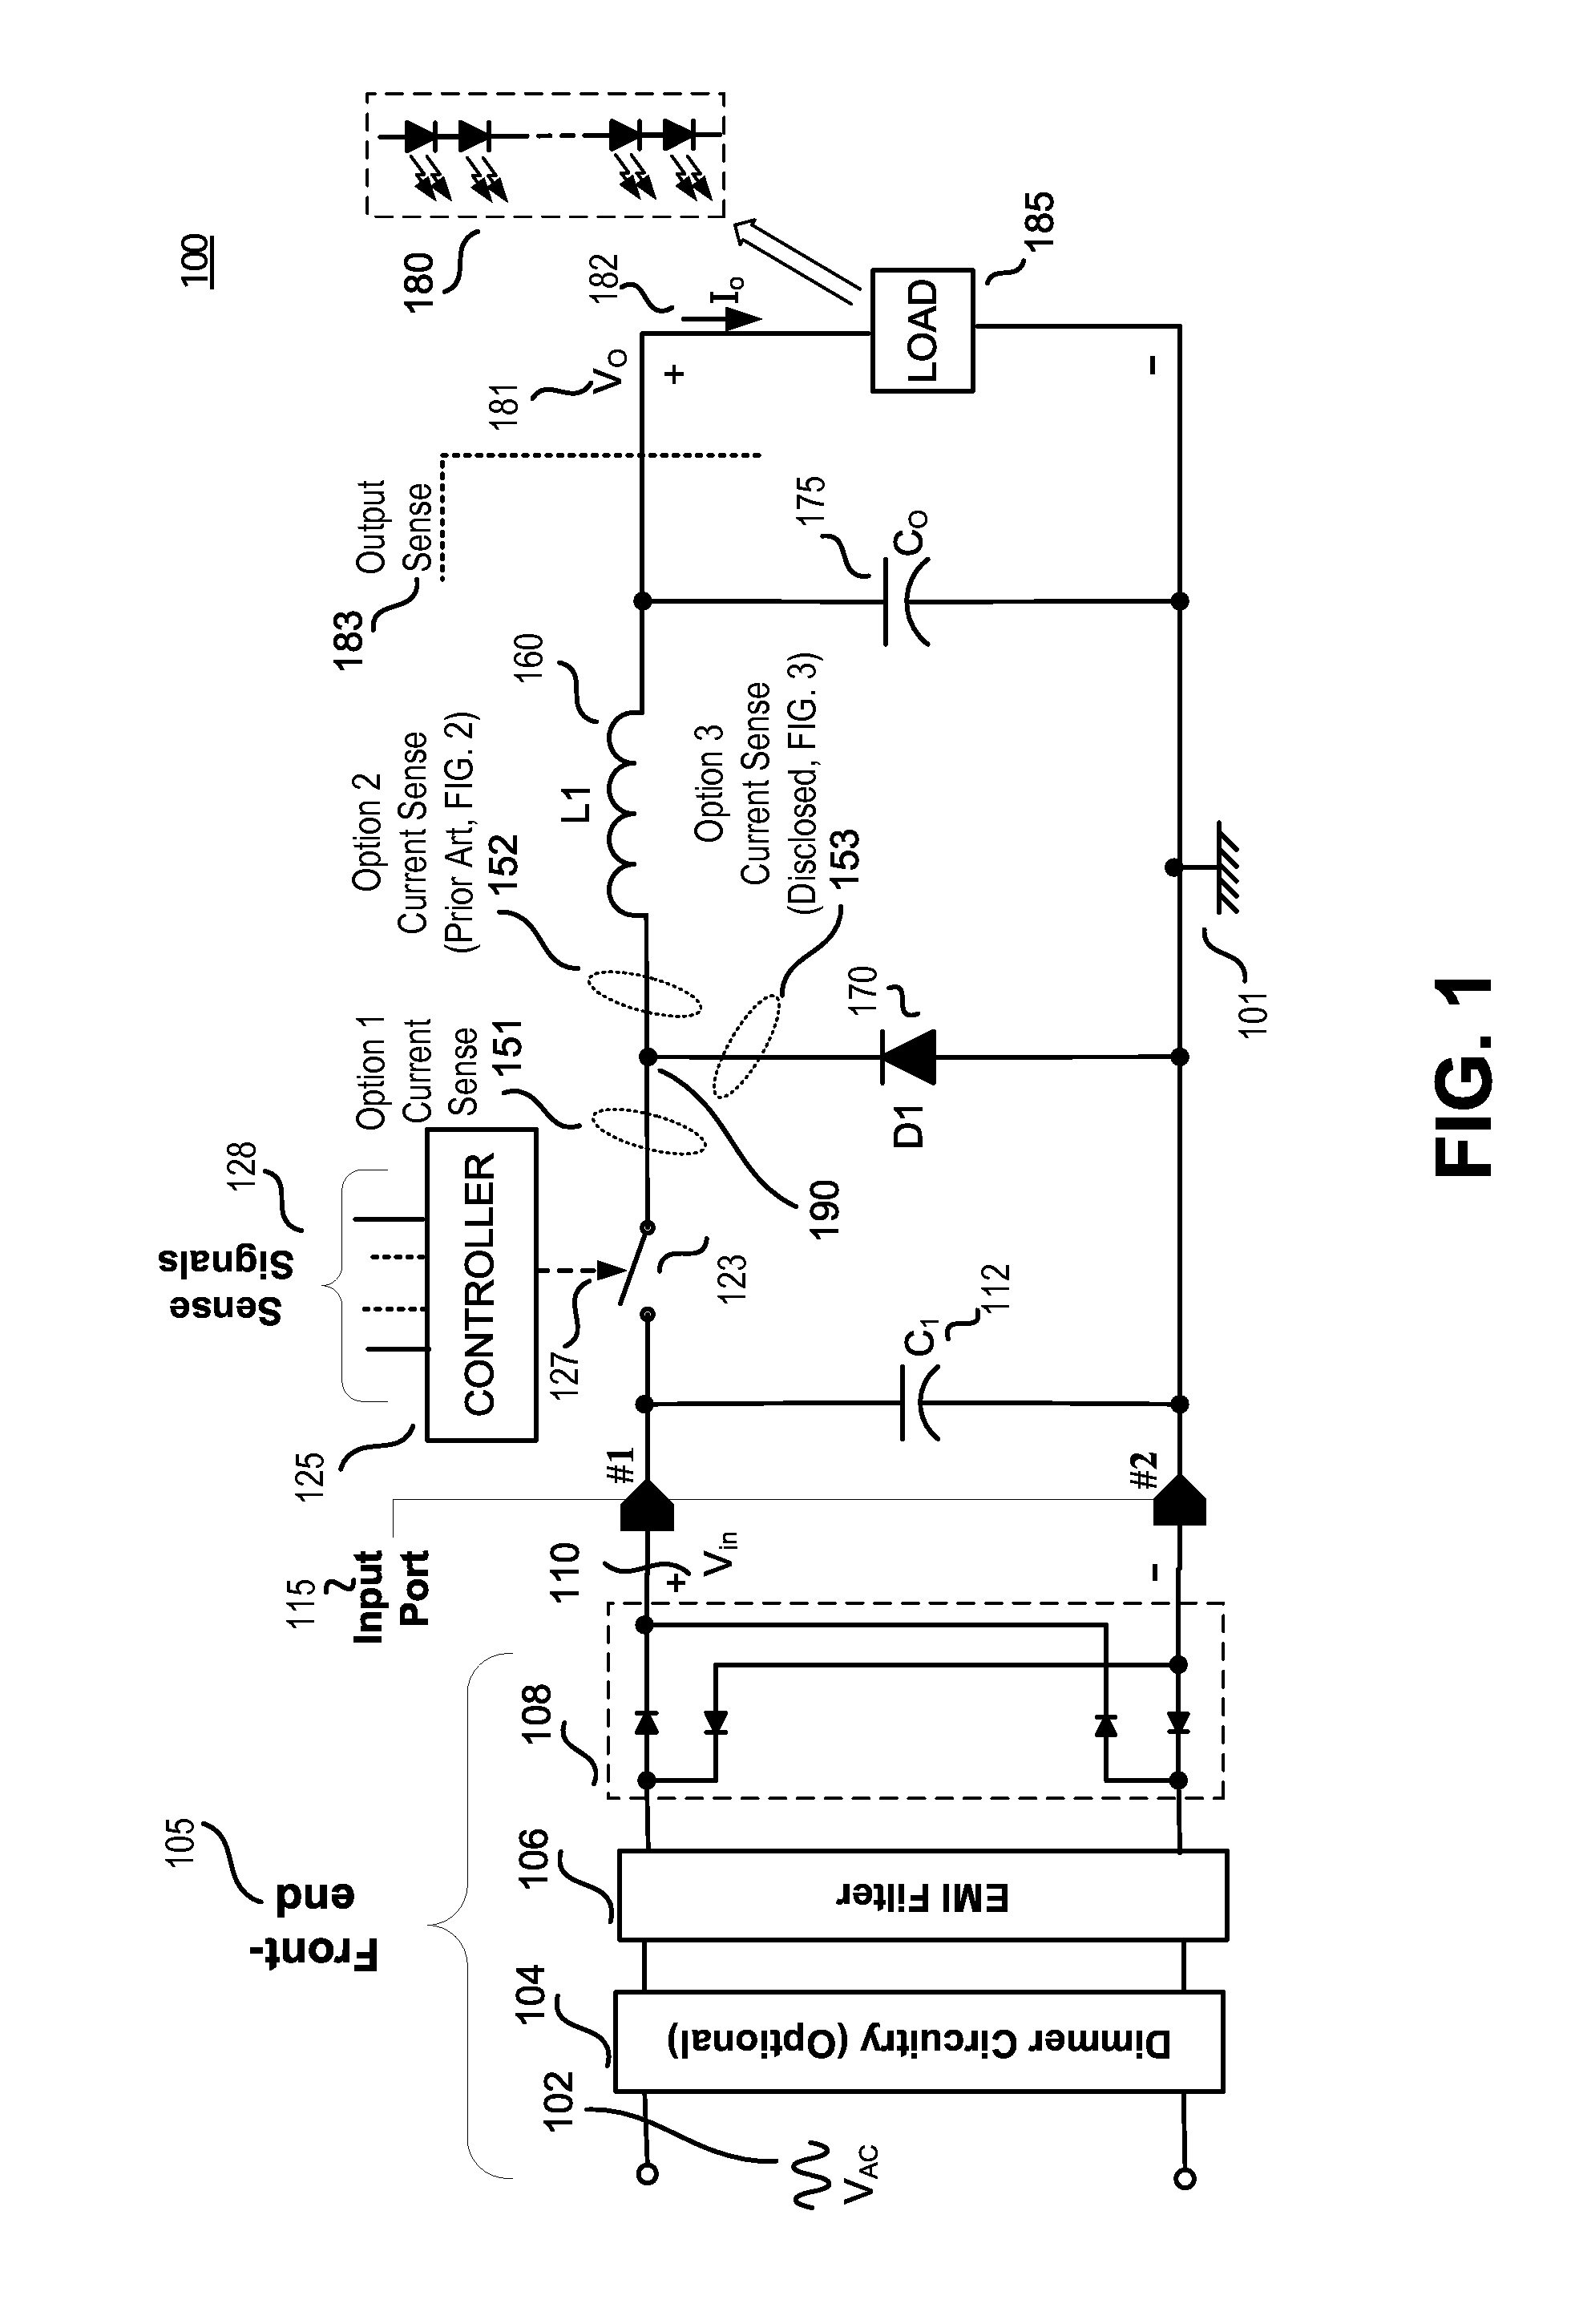 Simplified current sense for buck LED driver